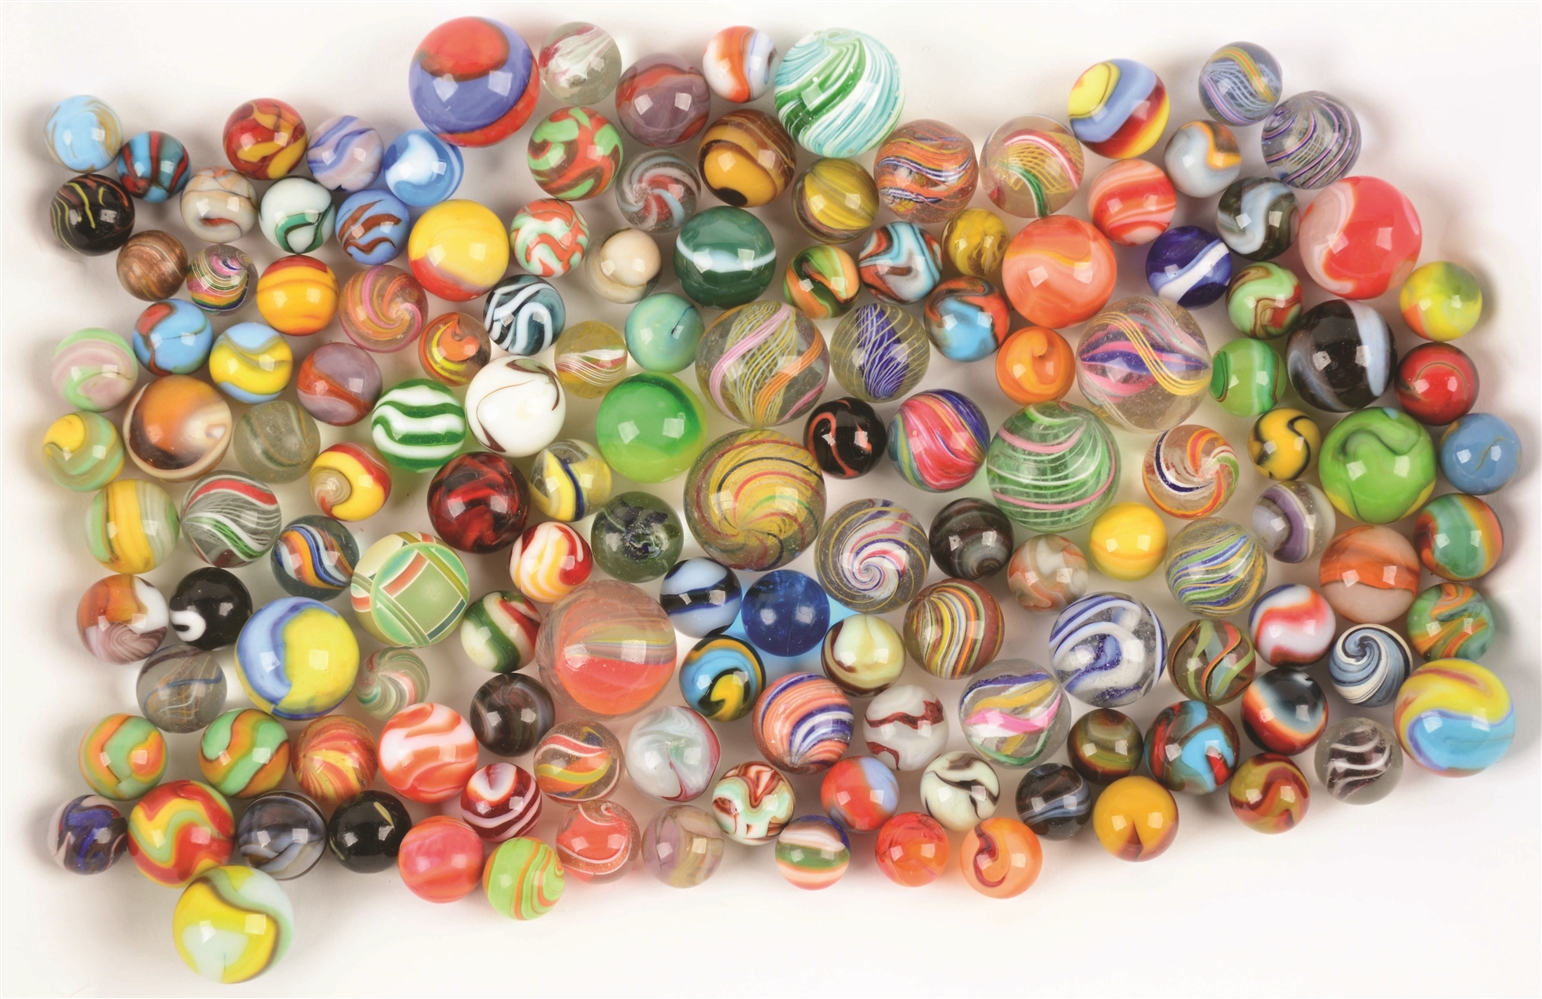 LARGE ASSORTMENT OF HANDMADE AND MACHINE MADE MARBLES.